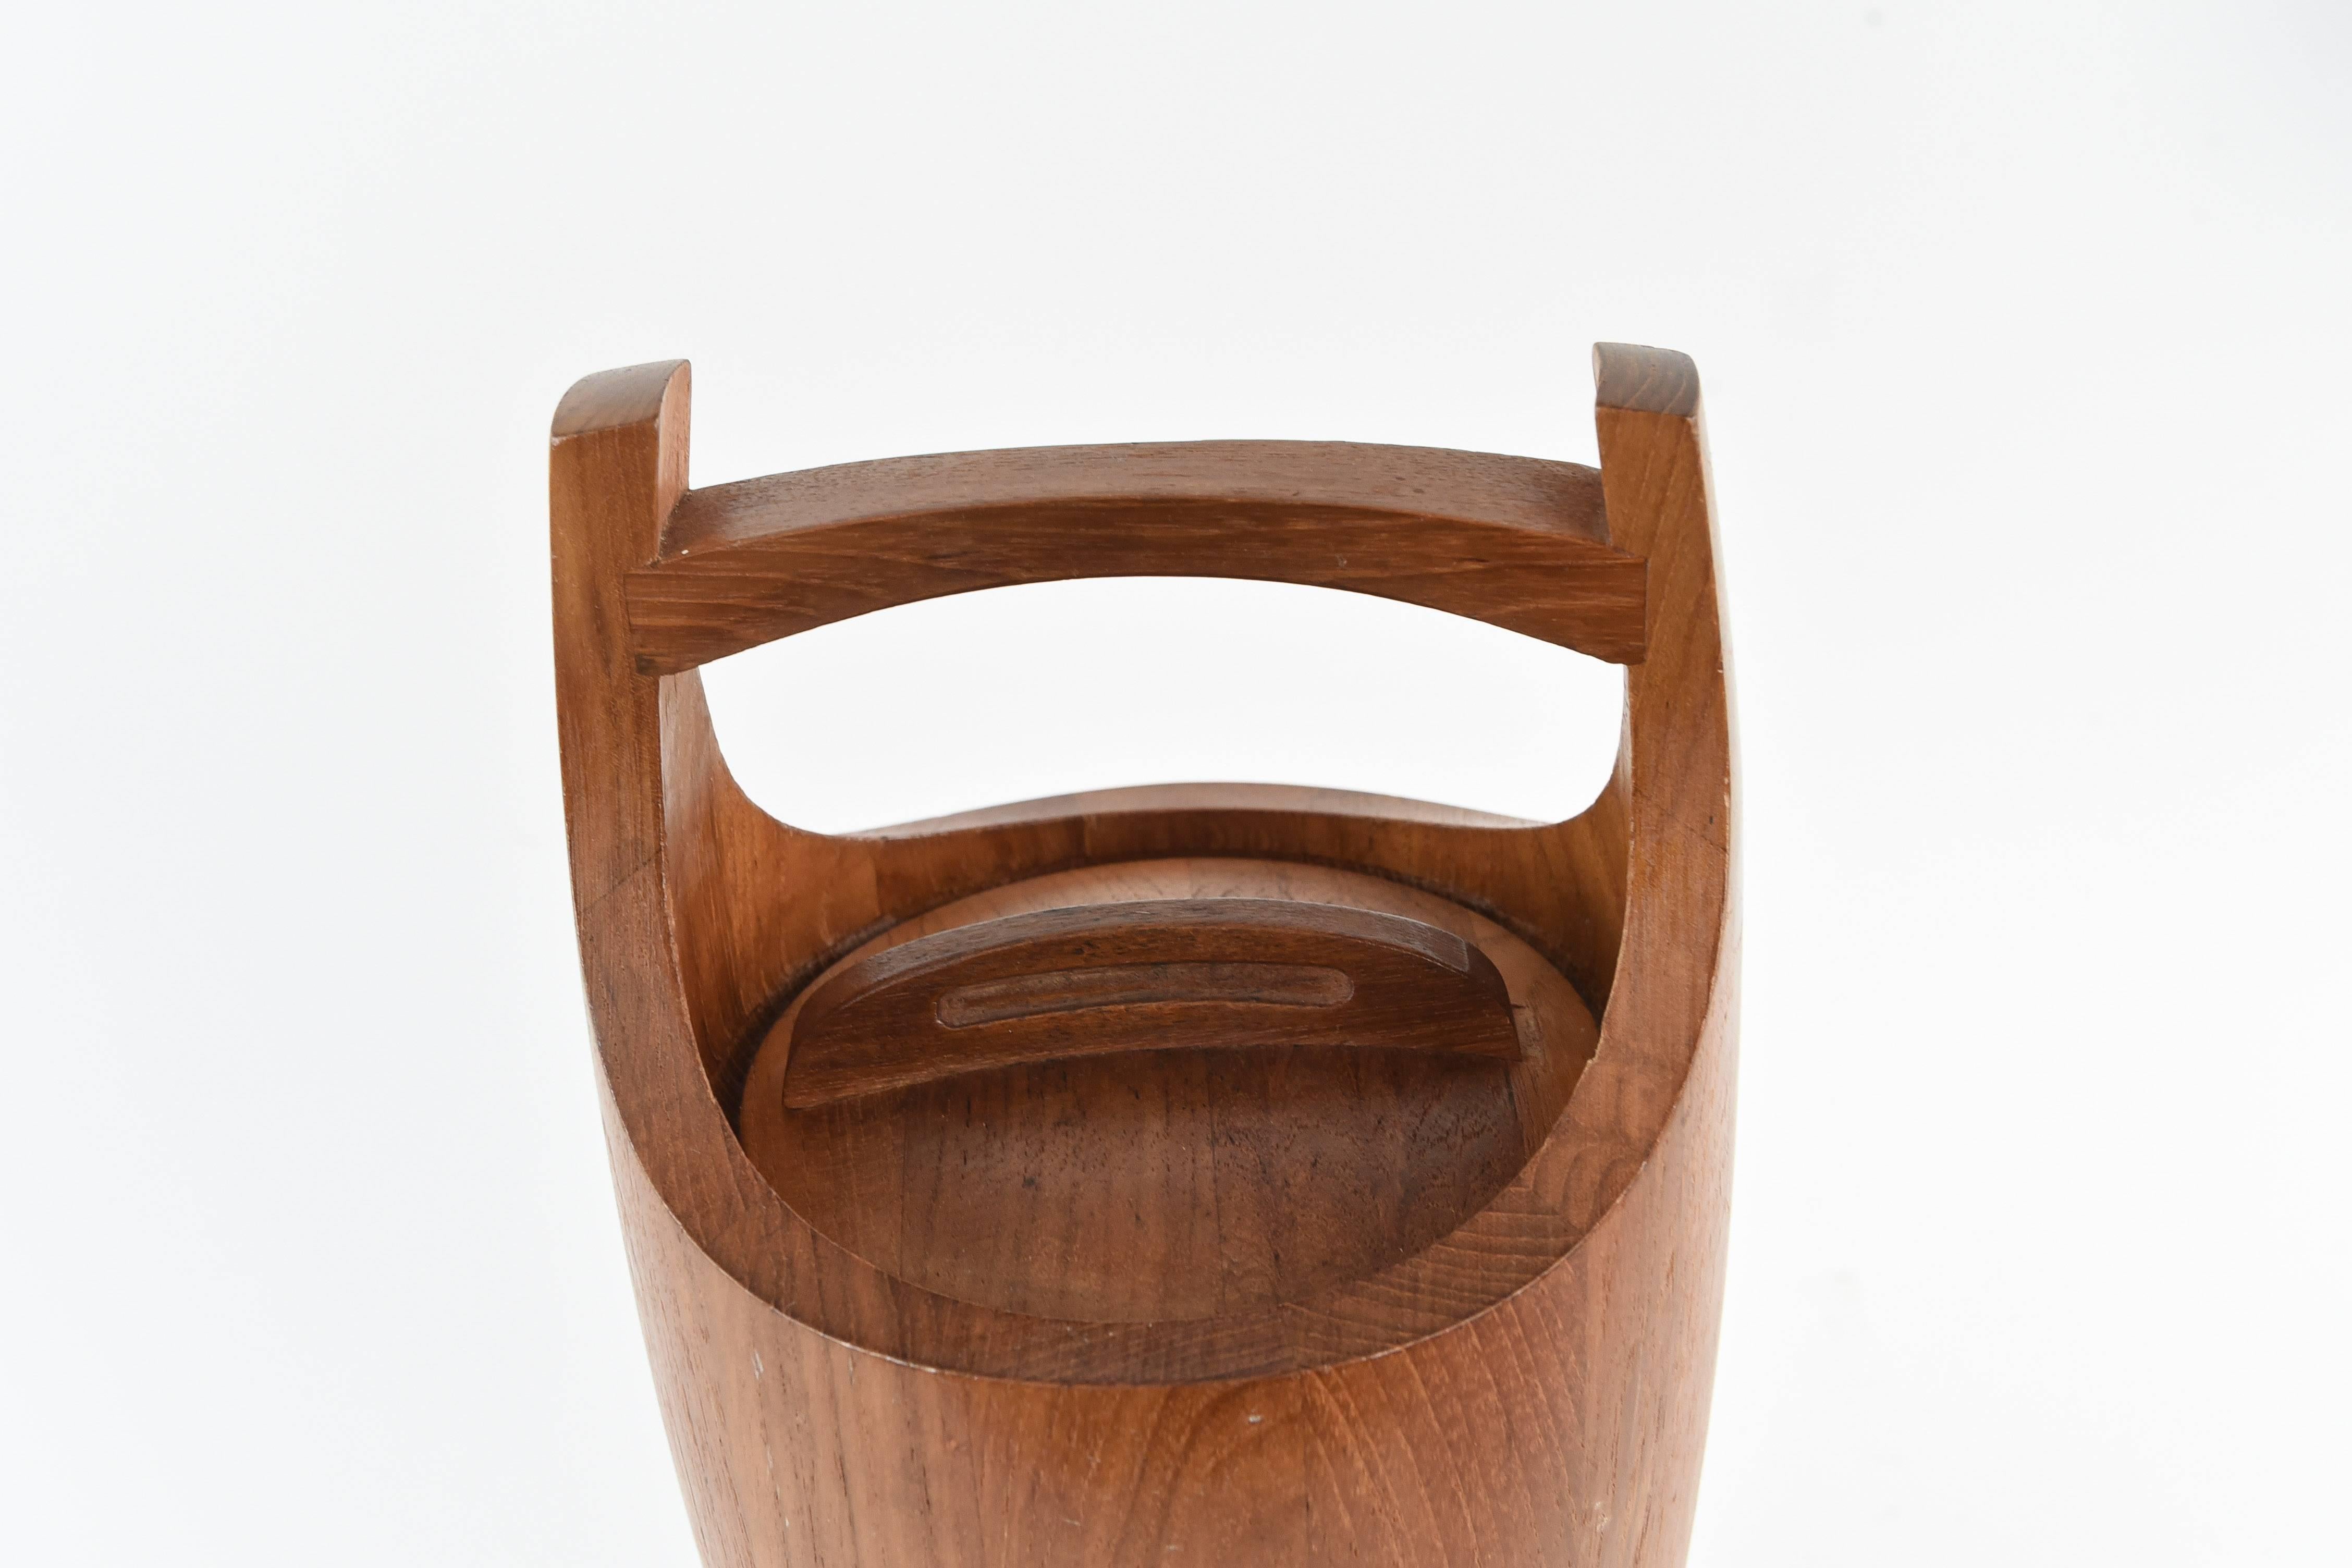 A Danish teak ice bucket, circa 1960s designed by Jens Harald Quistgaard for Dansk Designs. This is one of his more popular designs, with a timeless appeal.